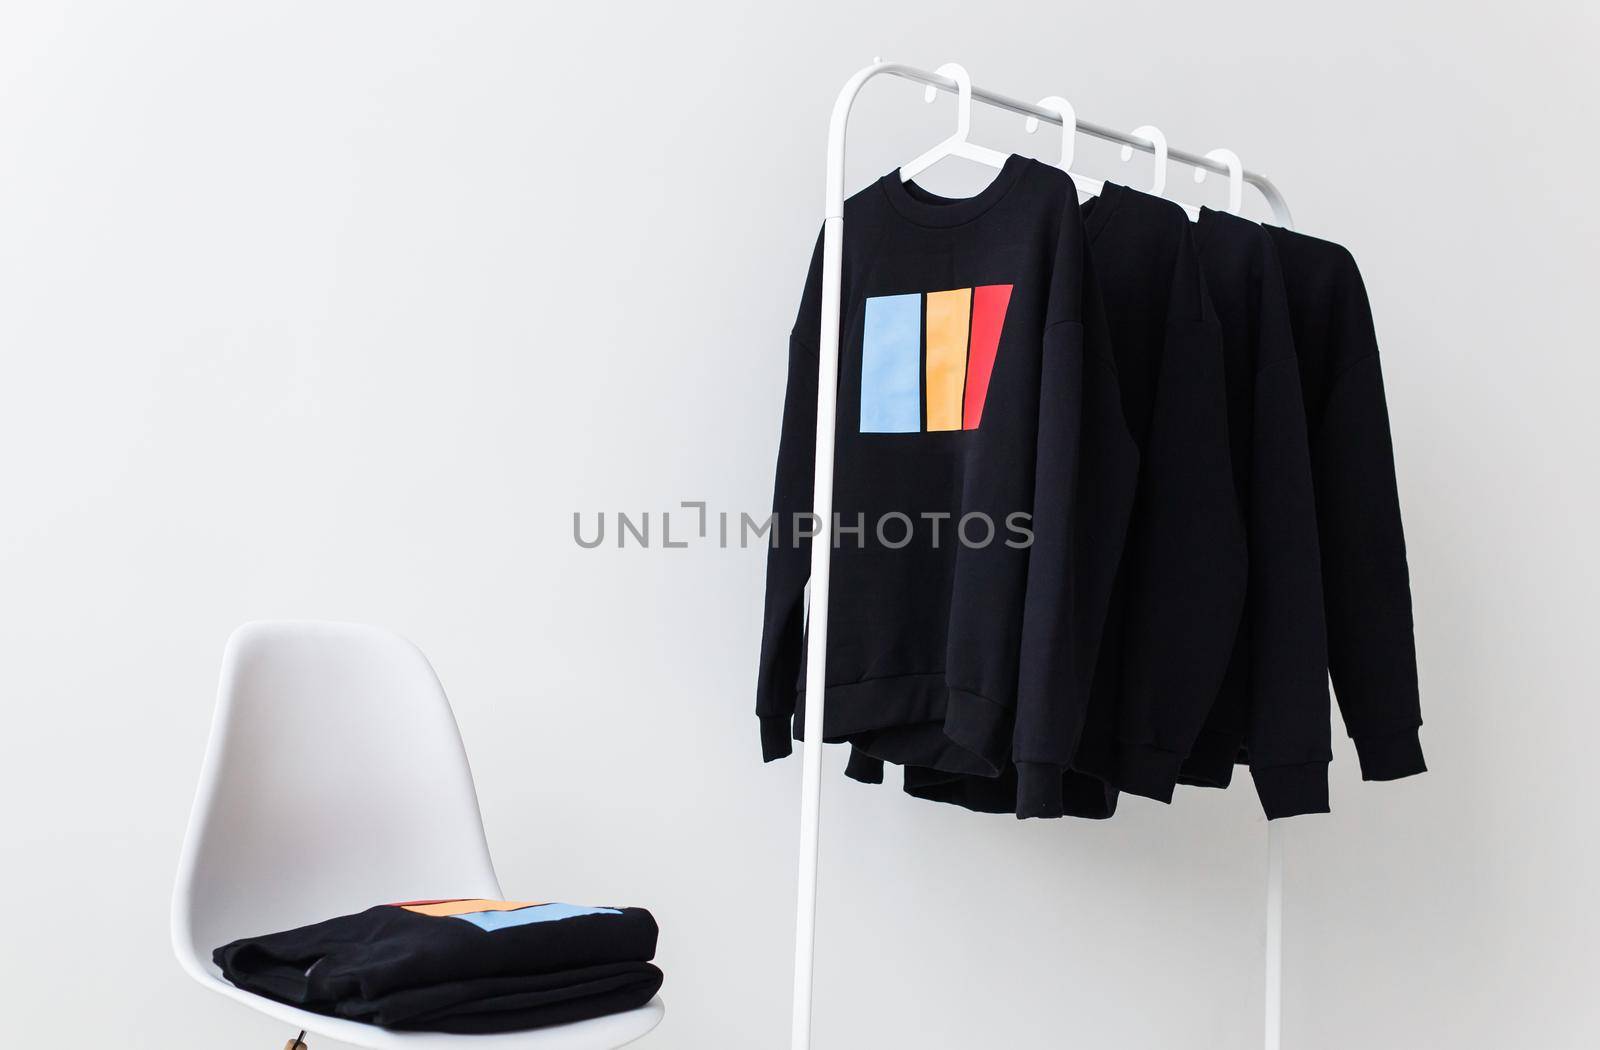 Sweatshirts and hoodies hanging on hangers in the store. Street fashion, unisex and youth wears. by Satura86